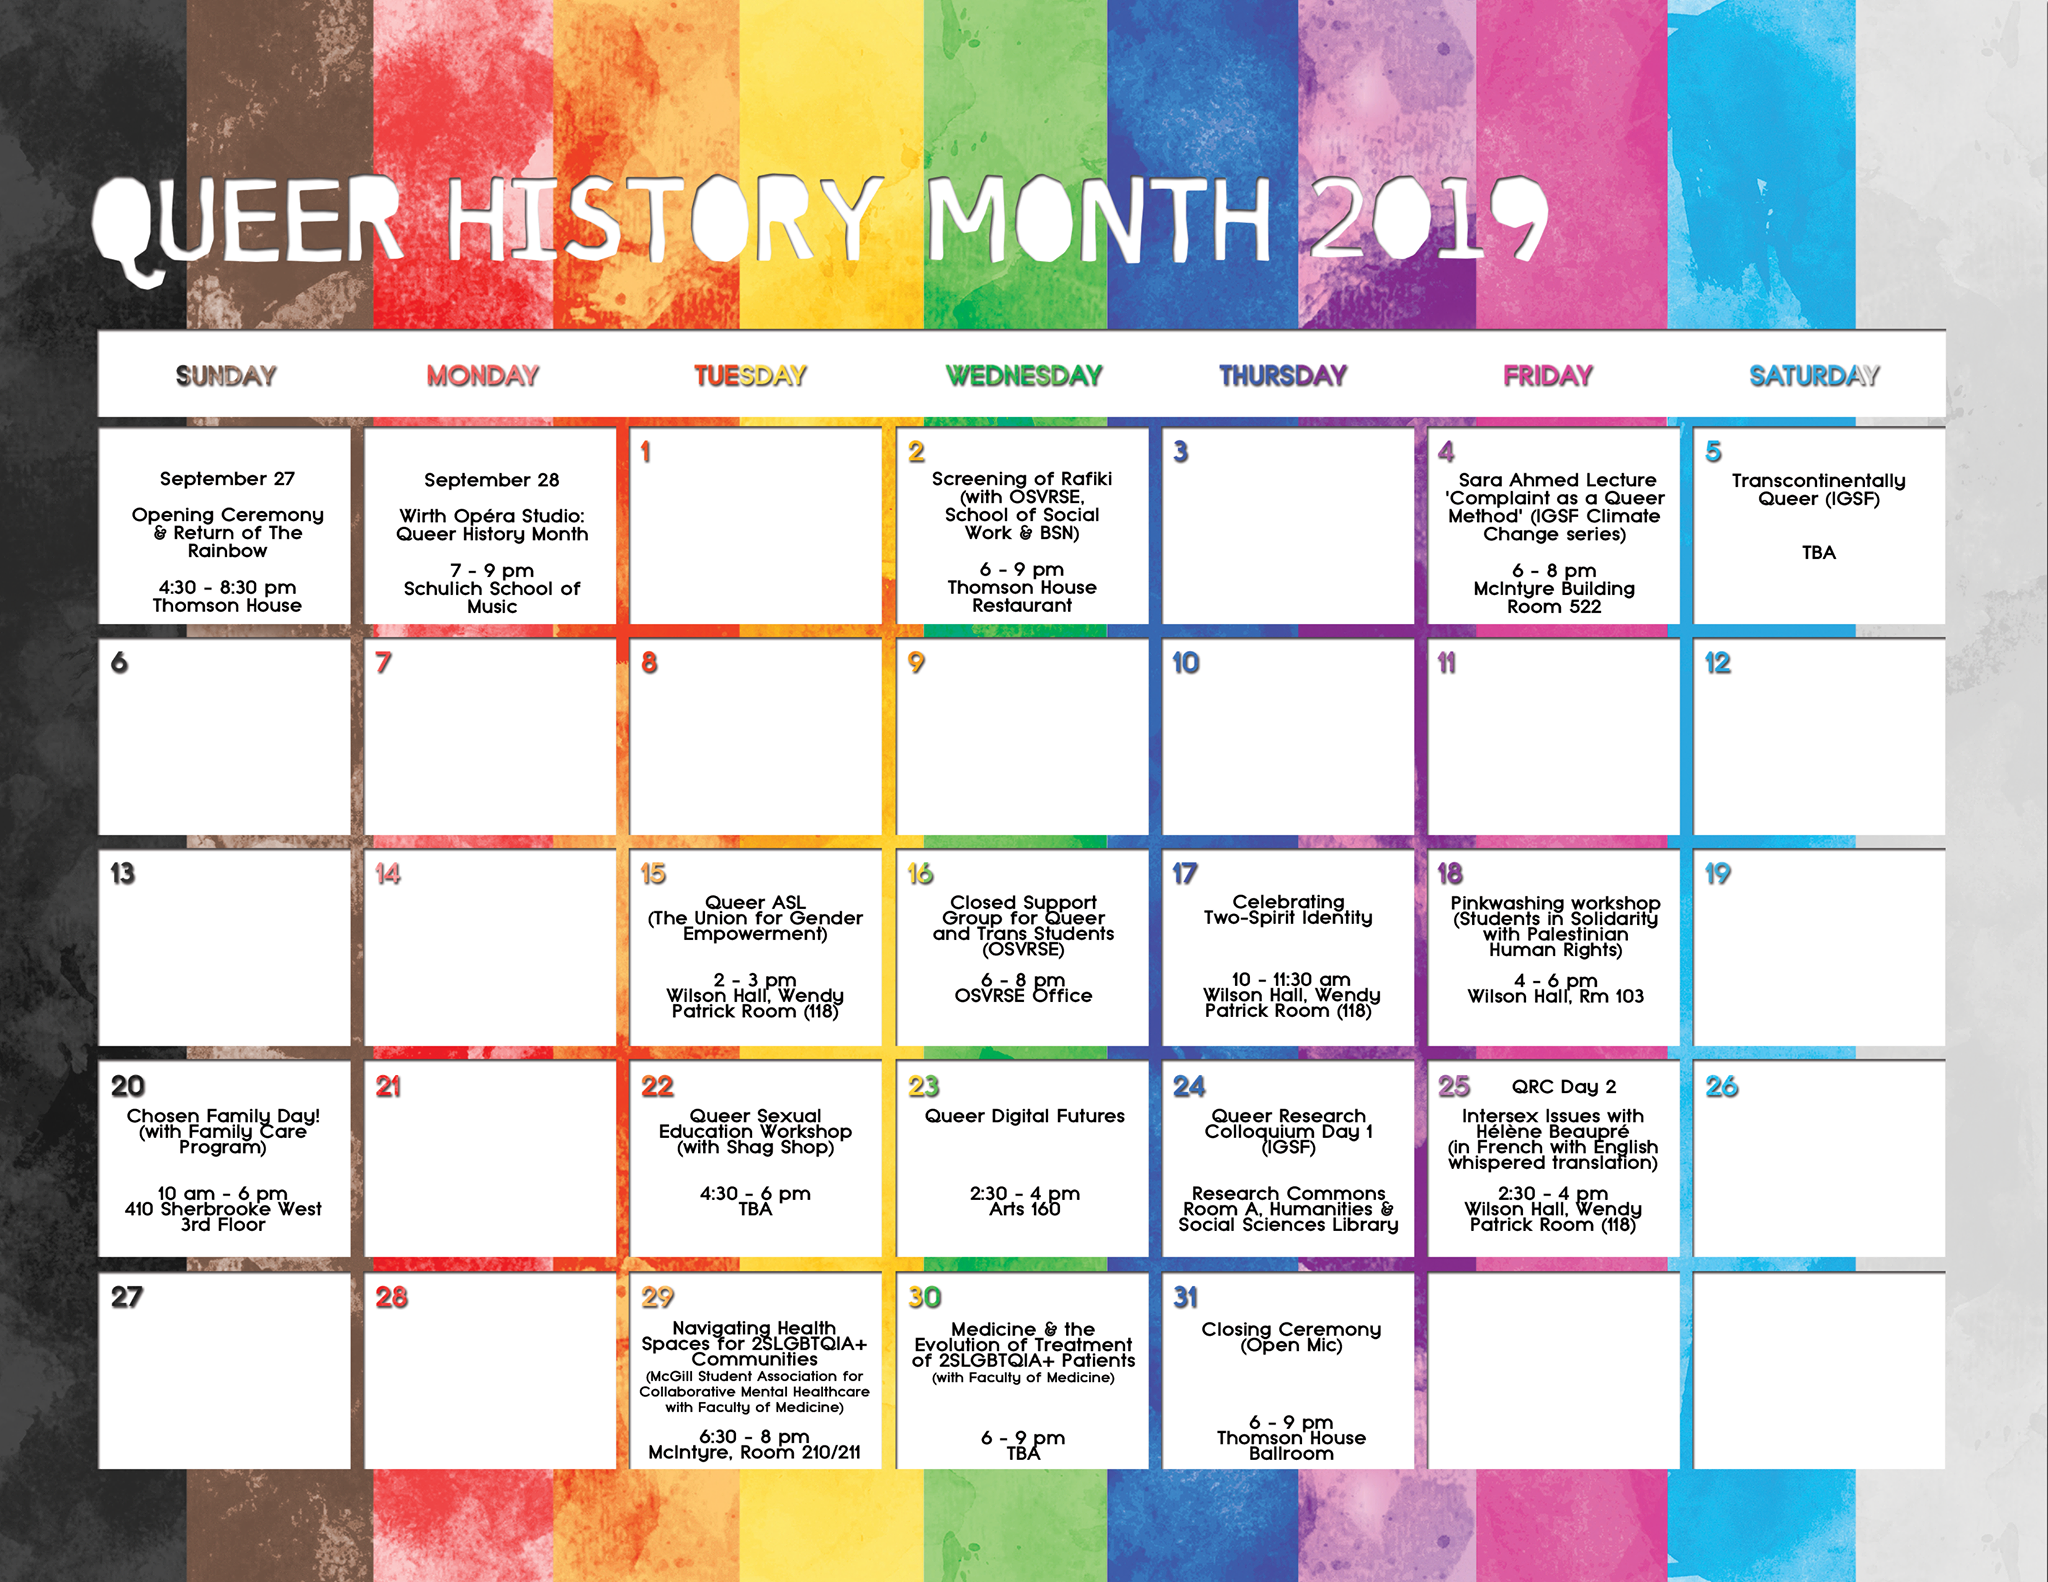 Calendar of events for Queer History Month 2019 on Queer